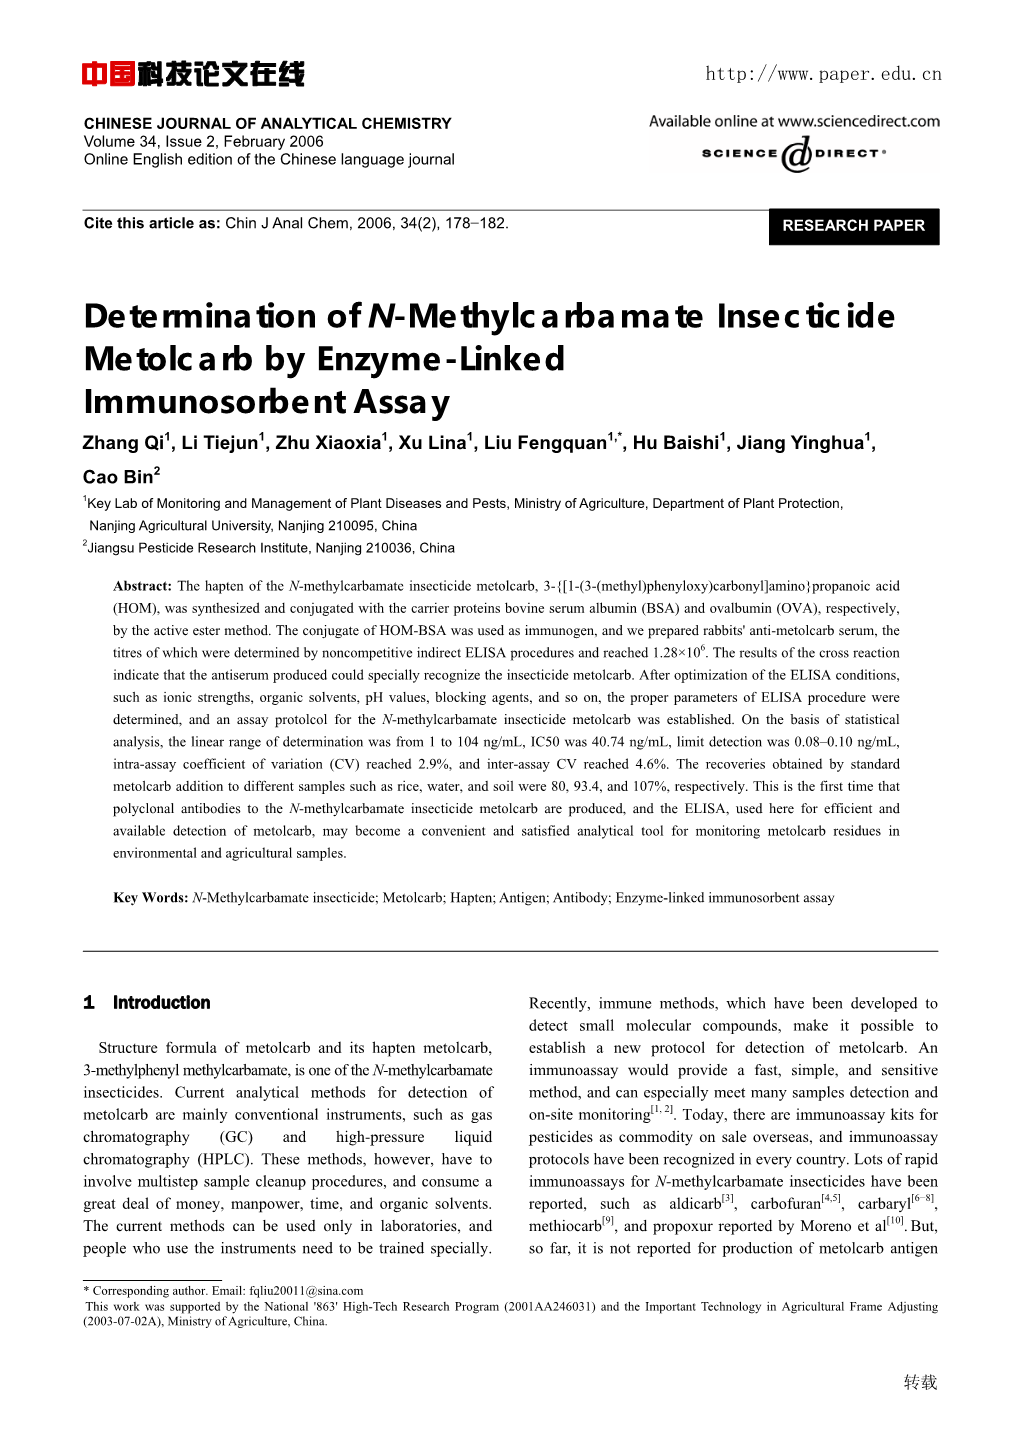 Determination of N-Methylcarbamate Insecticide Metolcarb by Enzyme